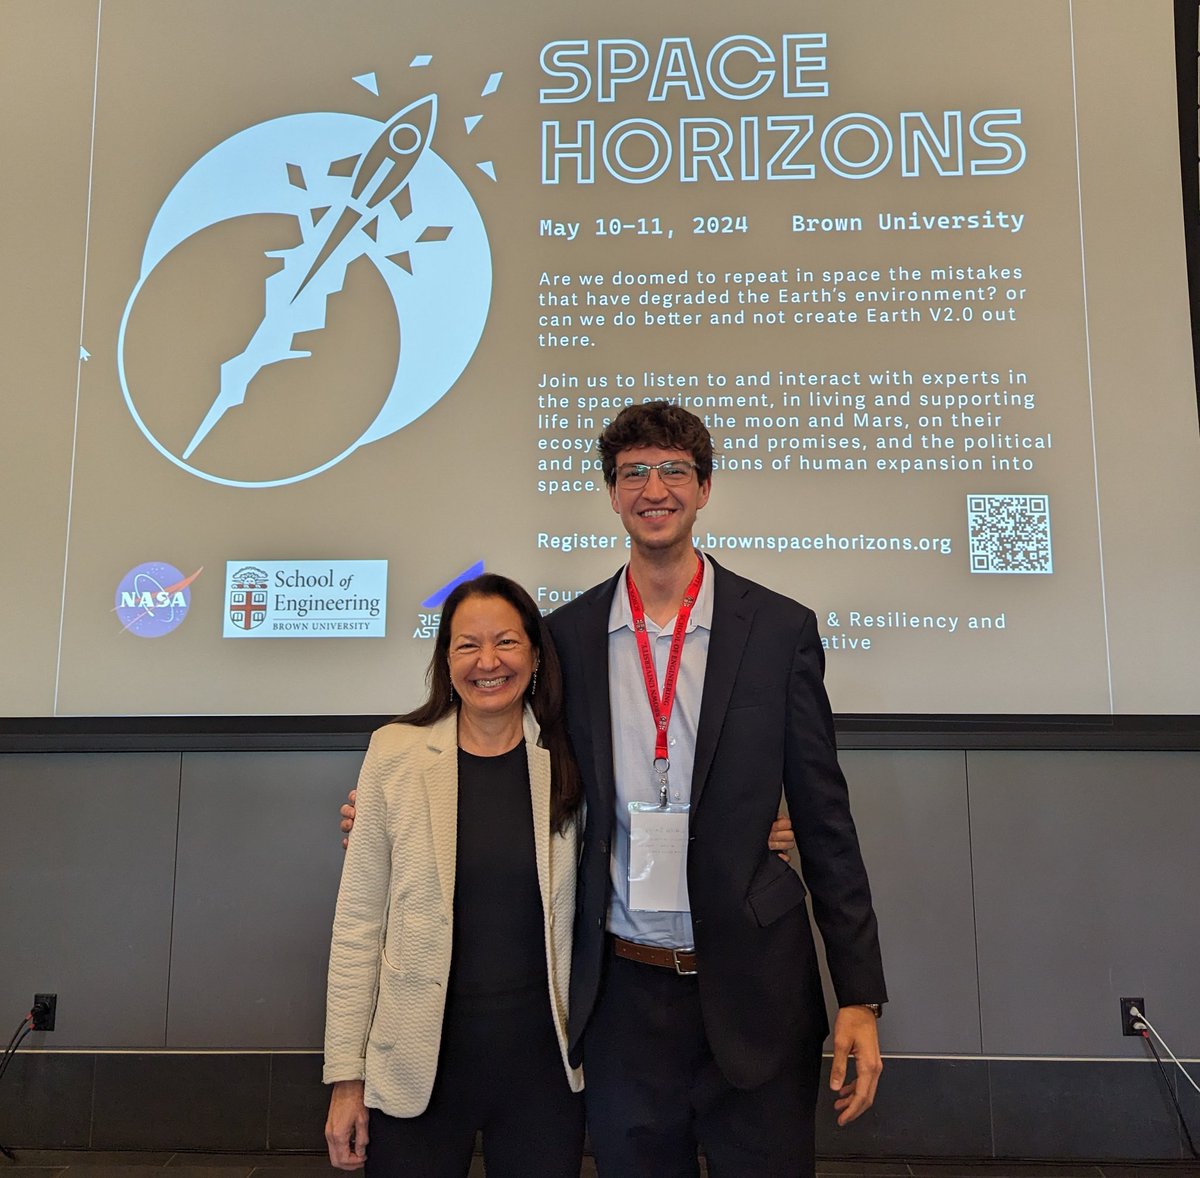 Rising 3L Caleb Bailey joined our Executive Director @Hanlonesq @BrownUniversity's Space Horizons symposium which focused on #SpaceSustainability. #SpaceLaw #OurStudentsRock